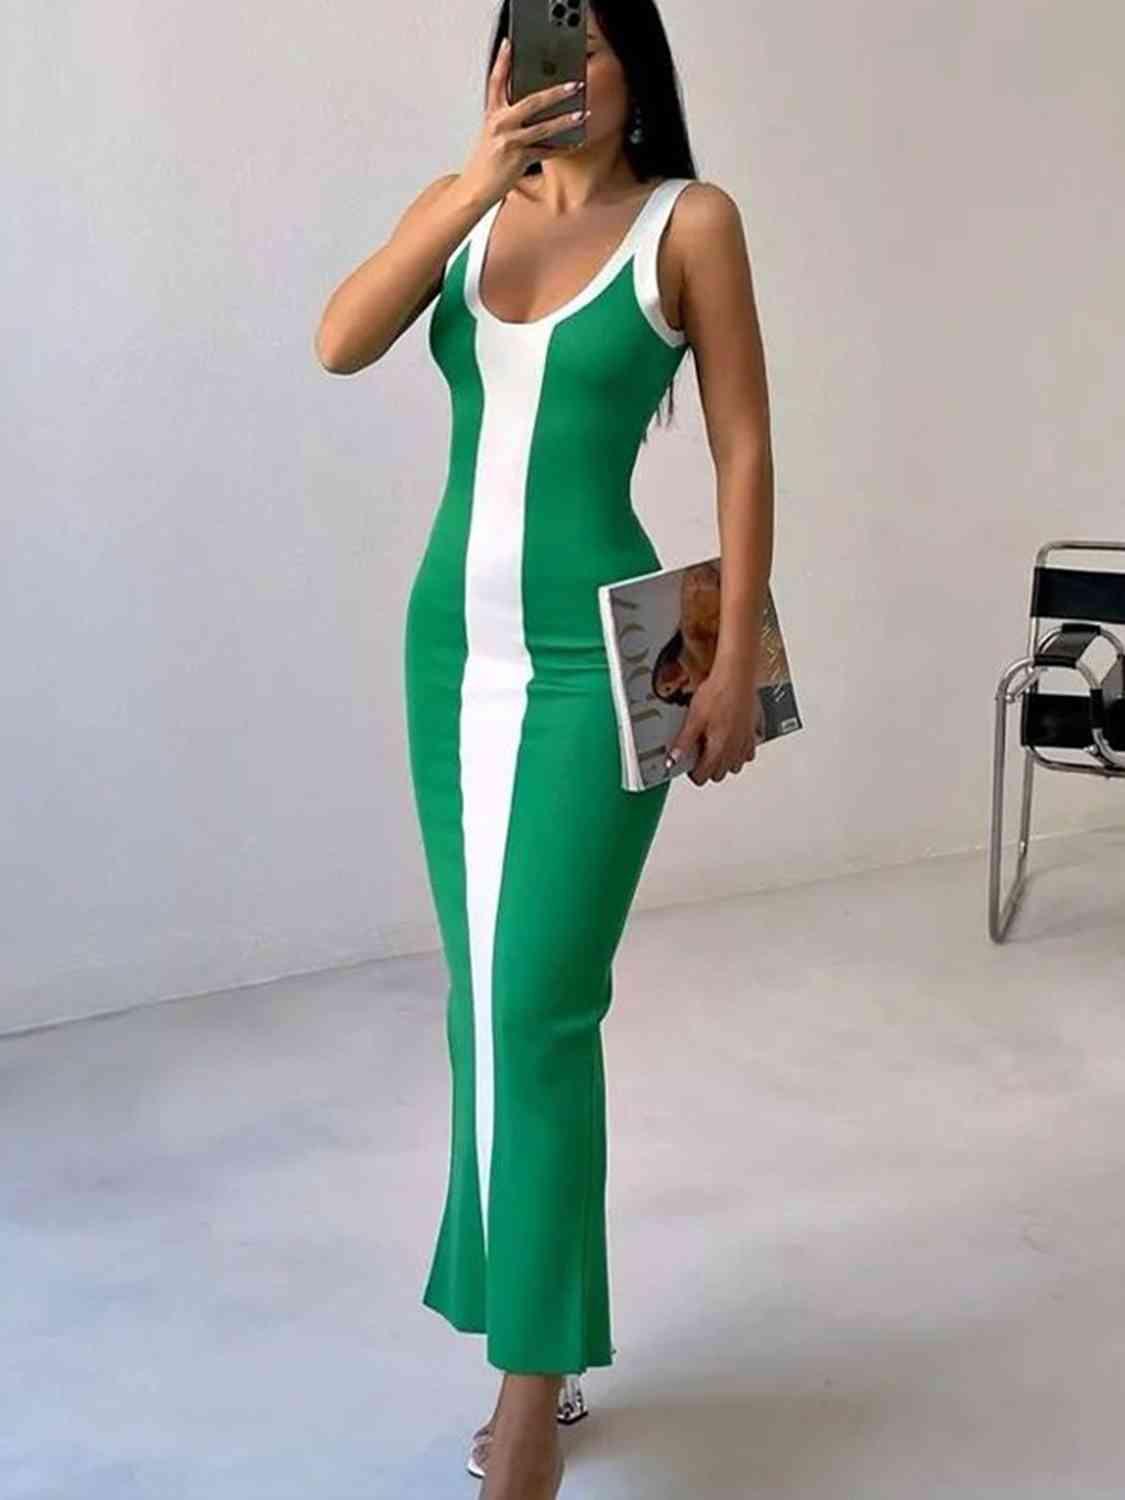 a woman taking a picture of herself in a green and white dress